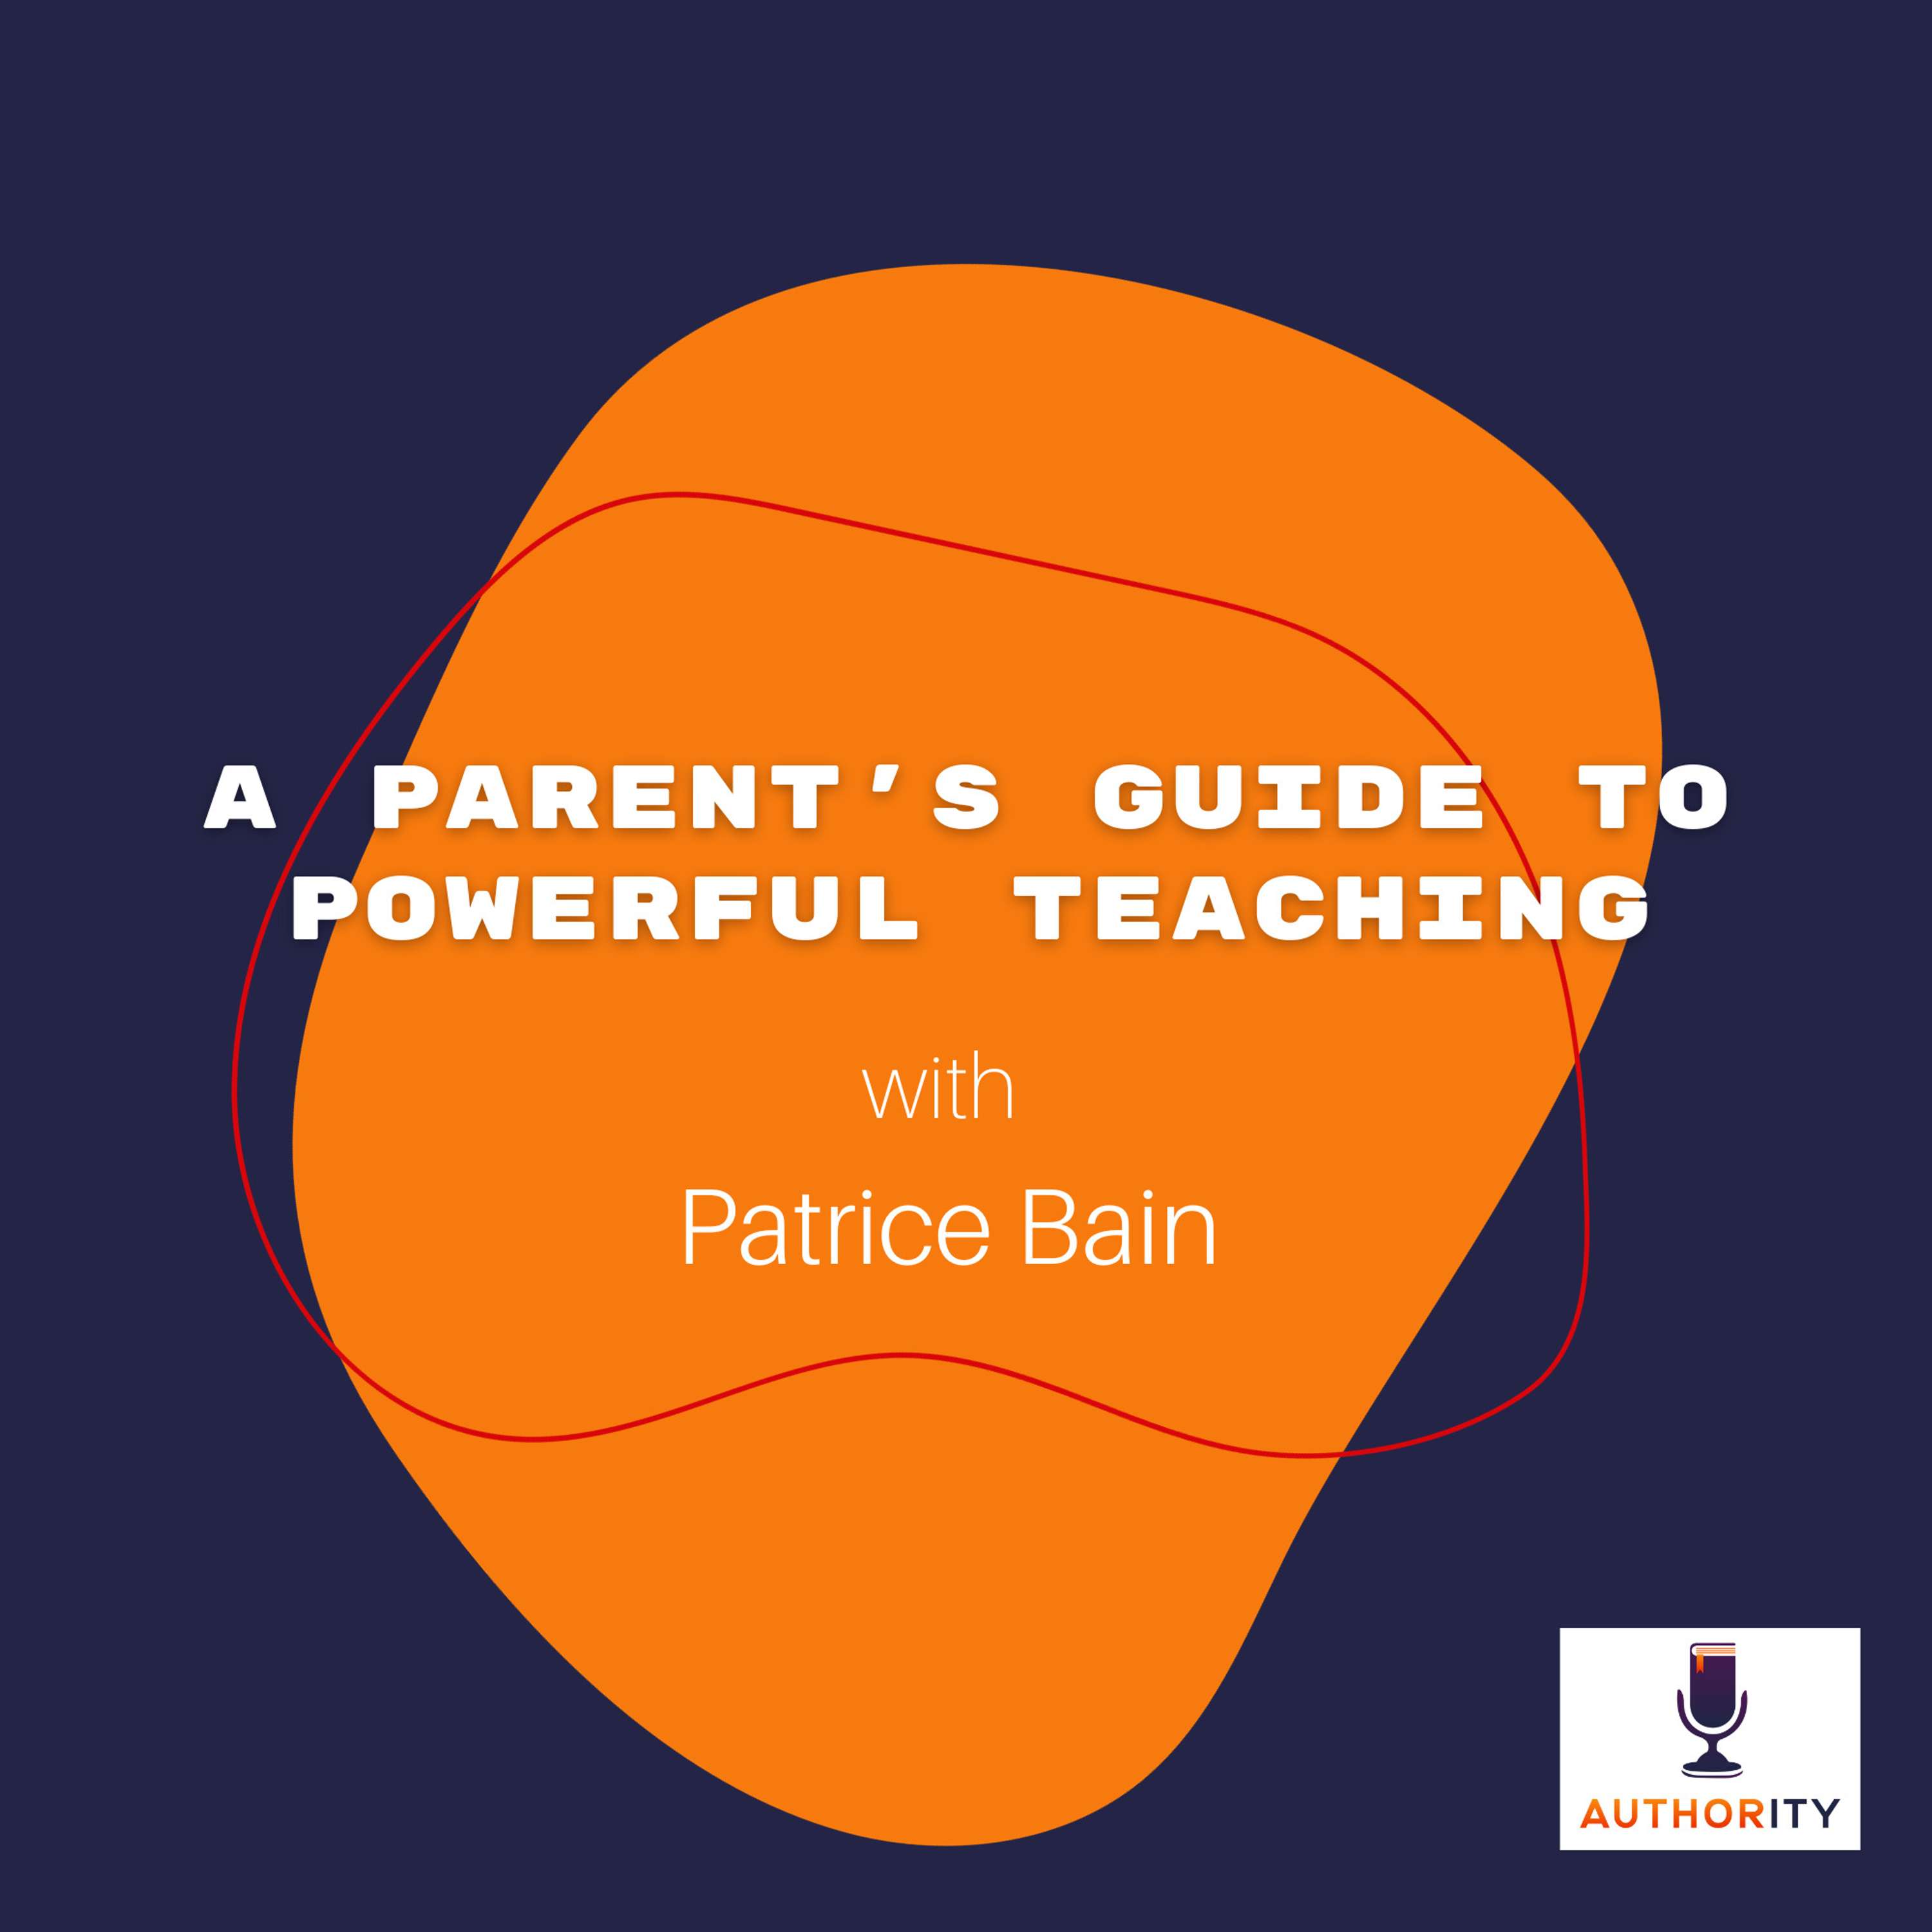 A Parent’s Guide to Powerful Teaching with Patrice Bain